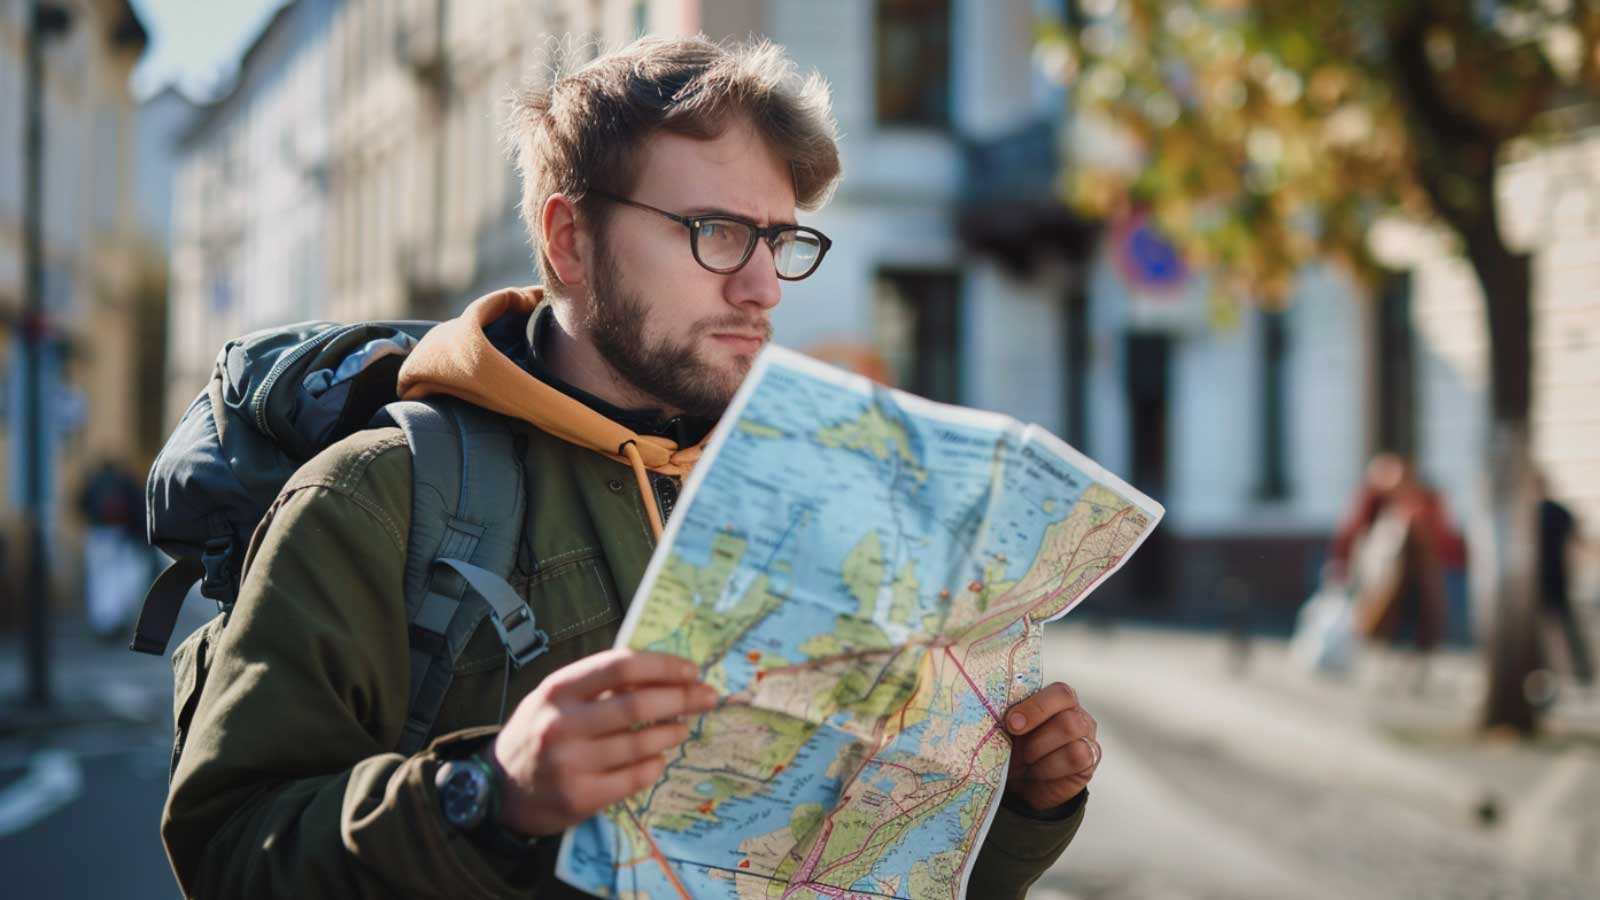 a man wearing glasses reading a map and trying to navigate a city he is traveling around.